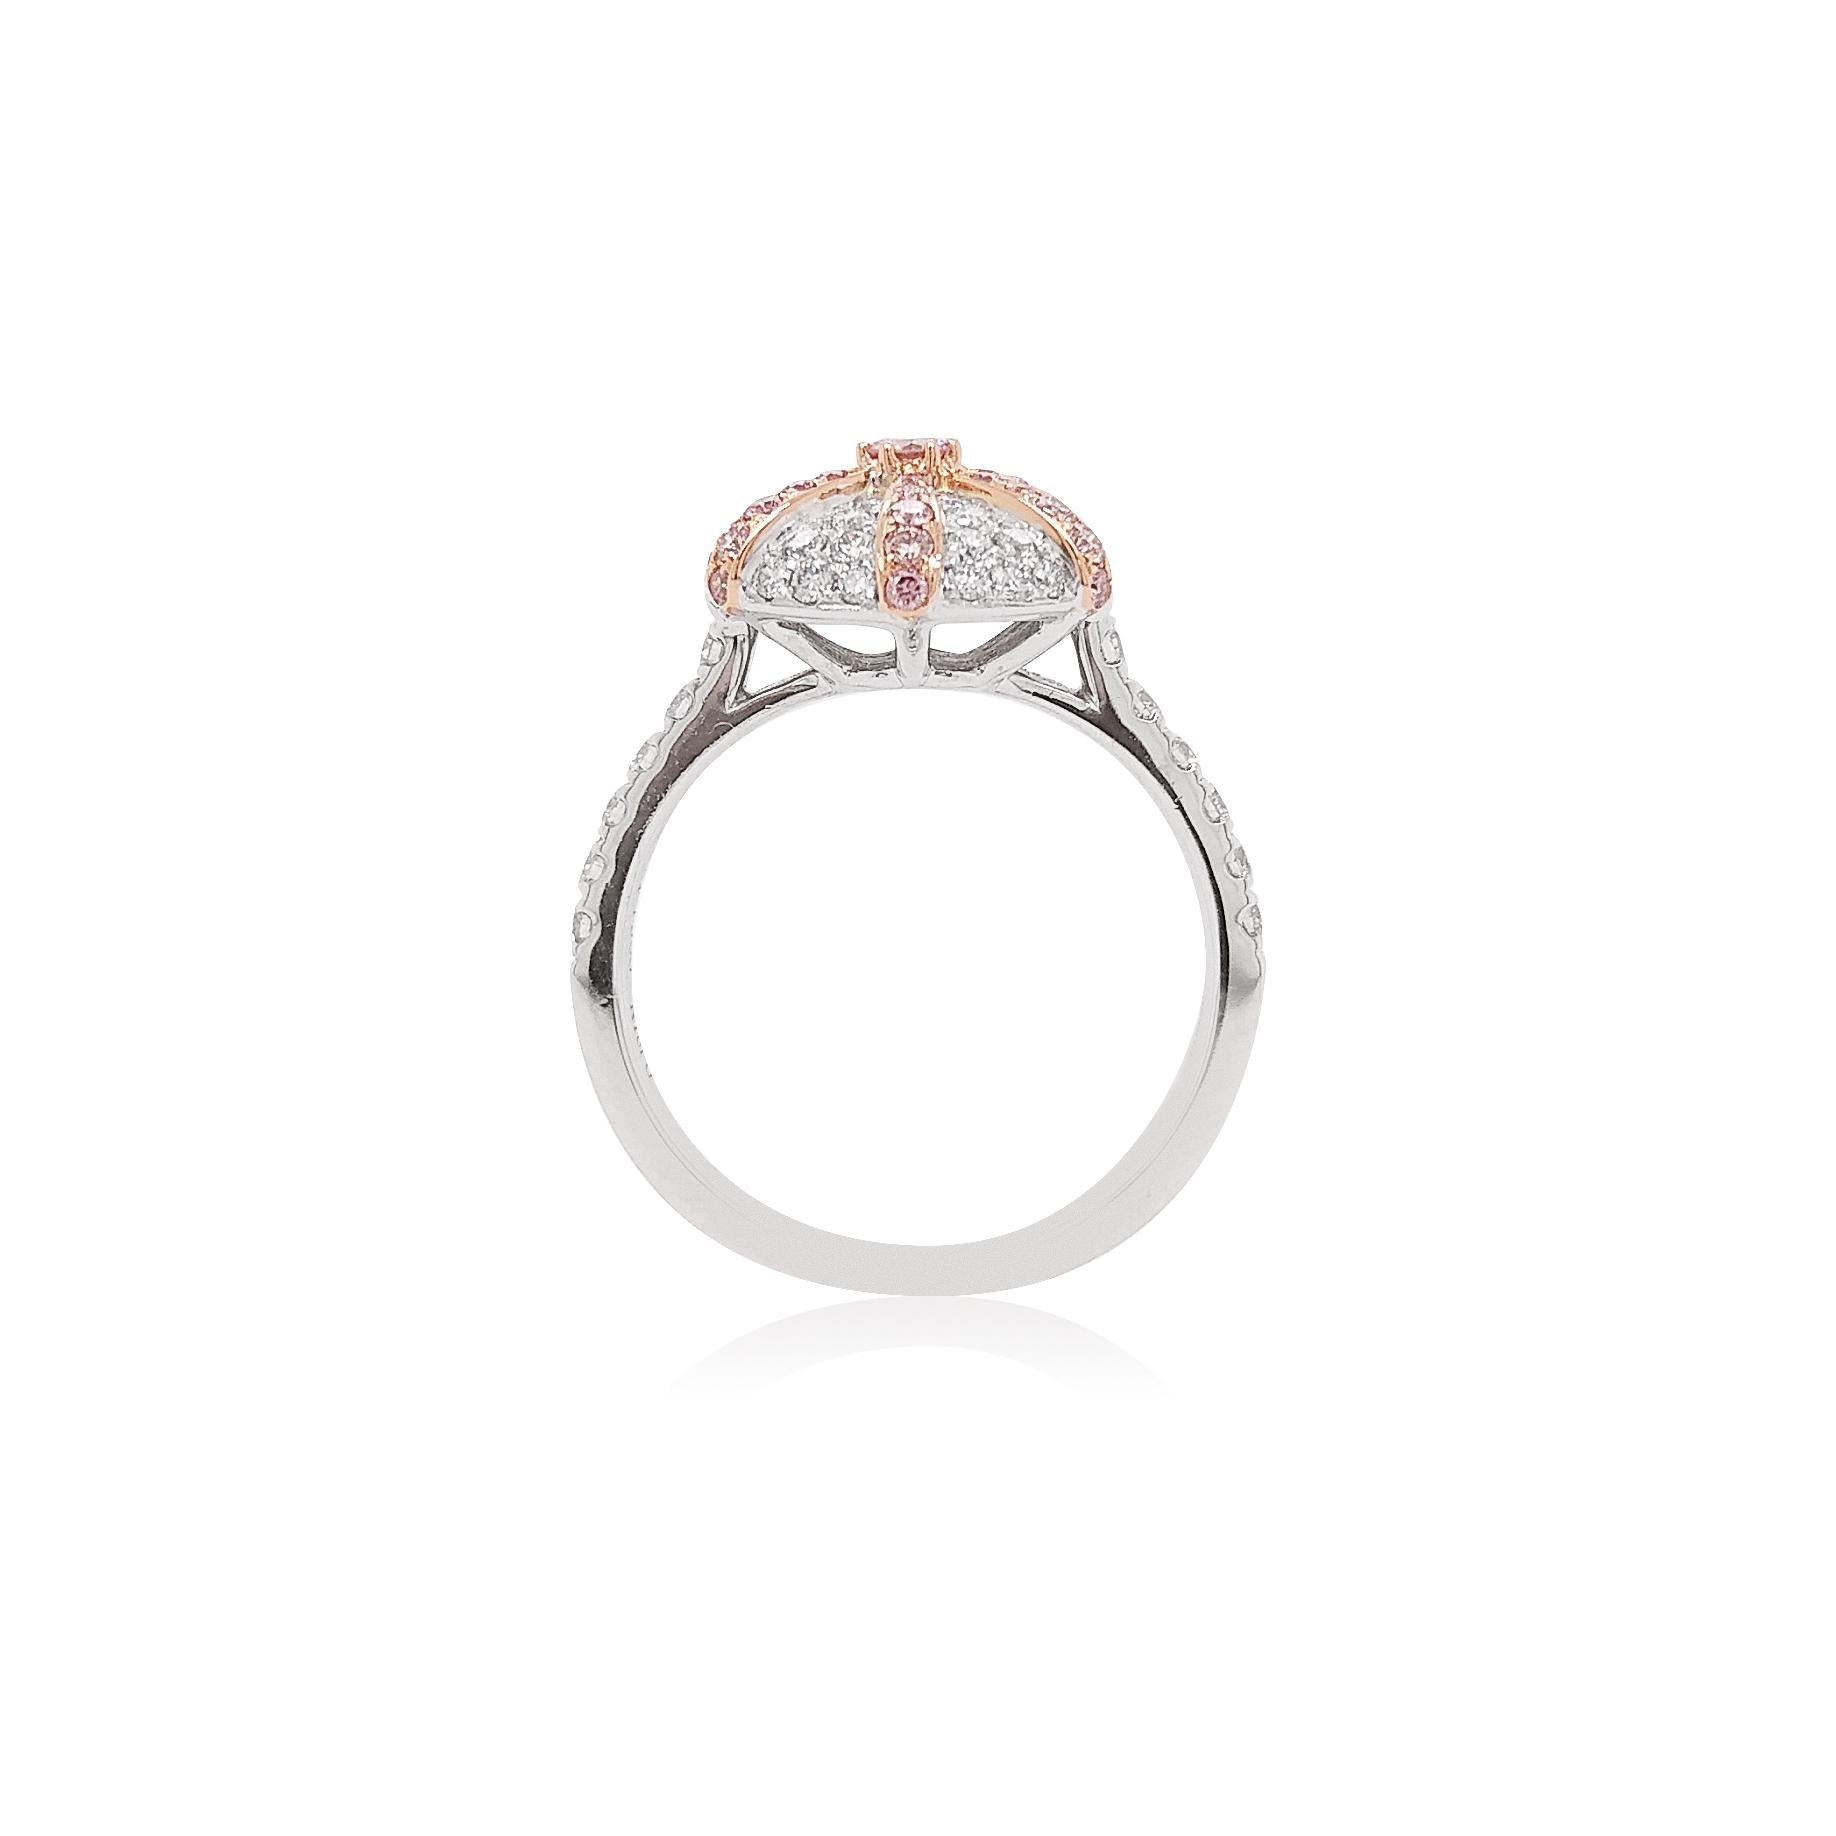 This contemporary Platinum ring features Argyle Pink diamonds at the forefront, surrounding an elegant arrangement of Pink and White diamonds formed into a star-shaped cluster. Modern and stylish, this ring will make a statement whenever and however